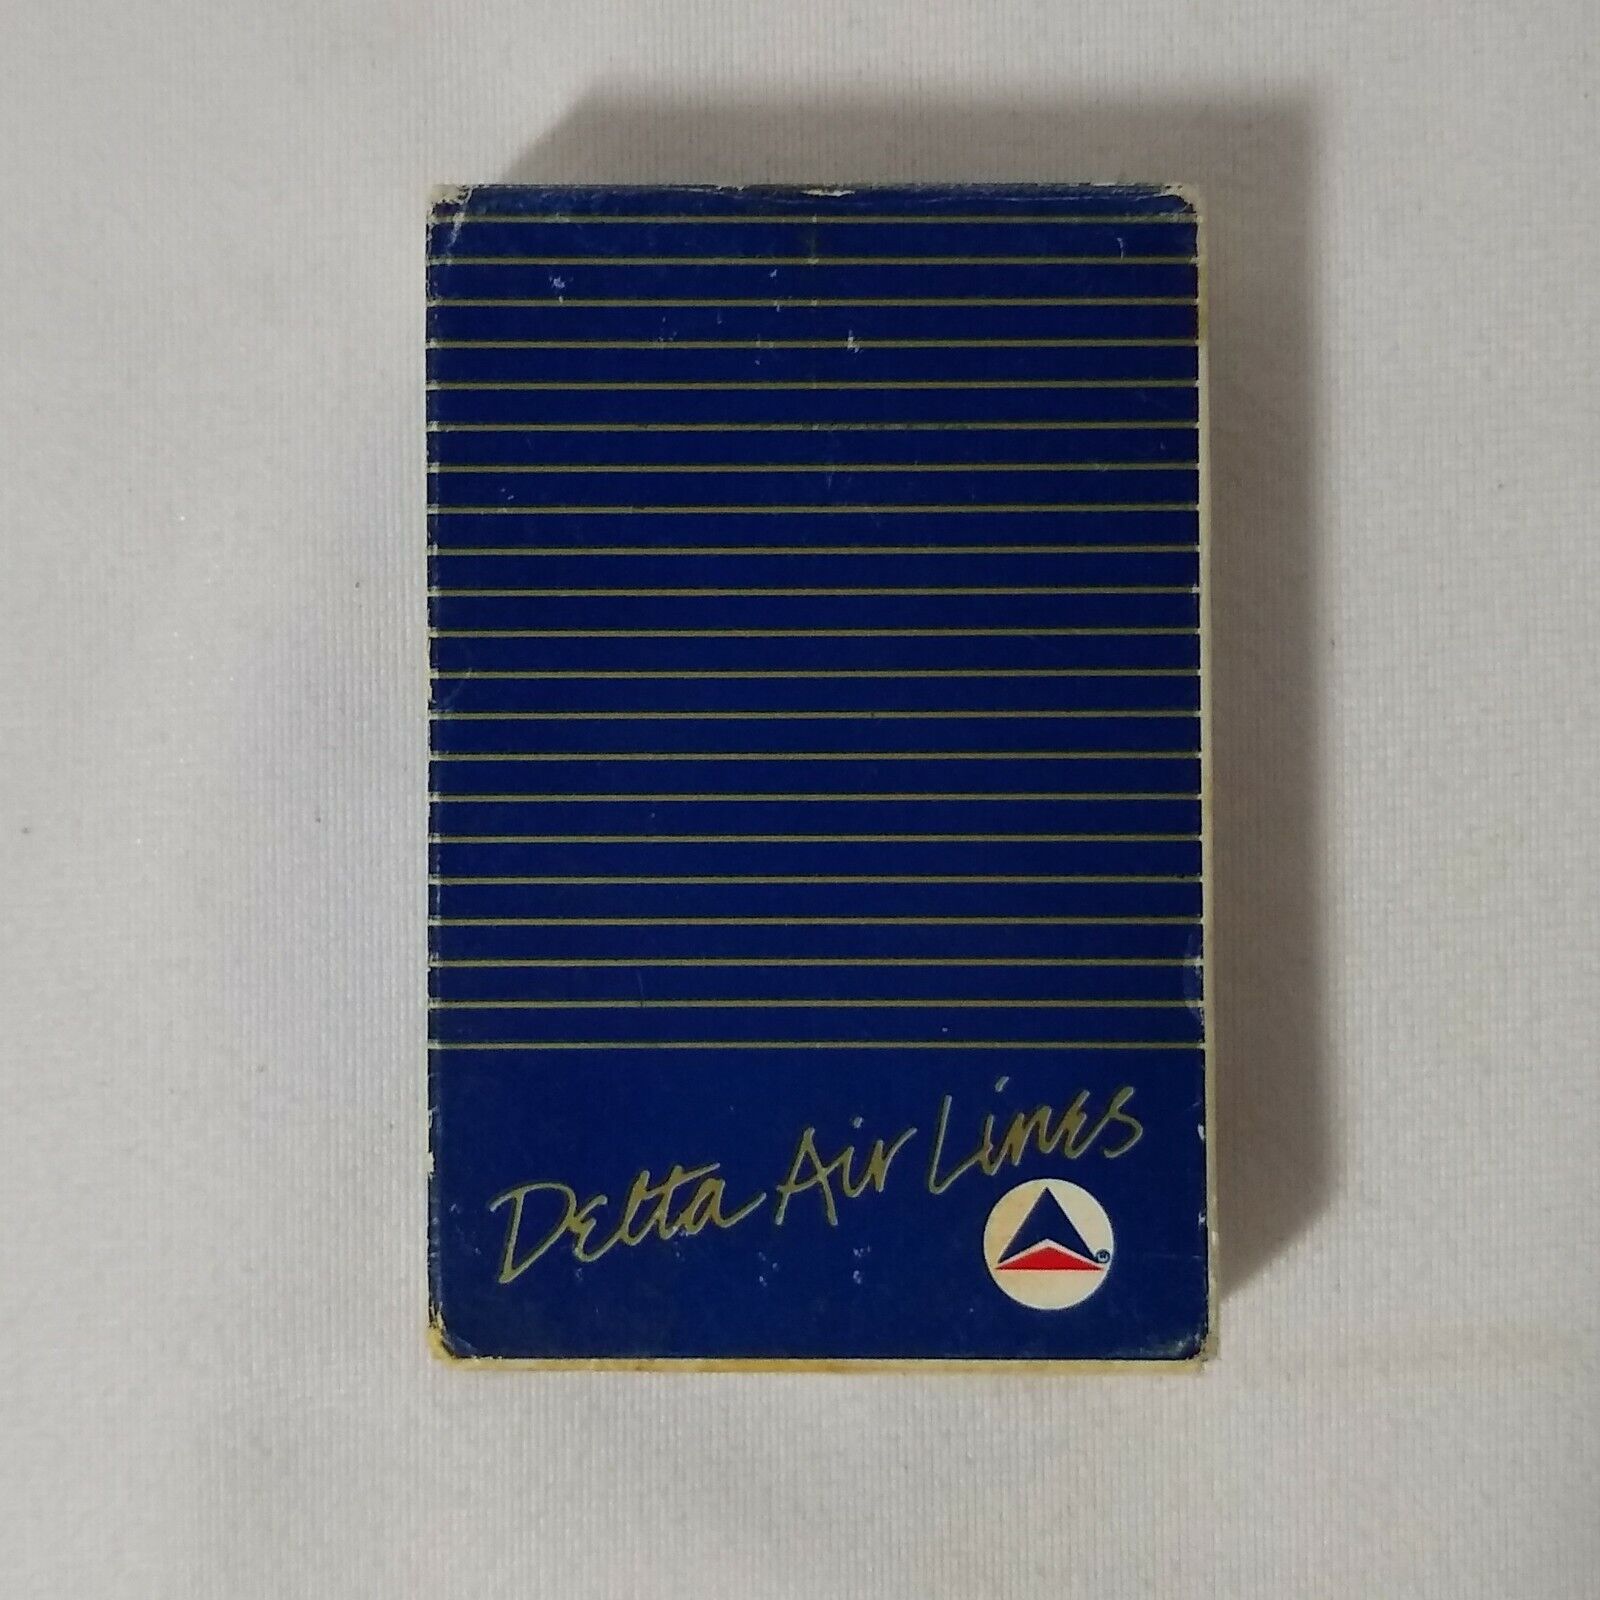 Vintage Delta Airlines Arrco Playing Cards Complete Collectable Memorabilia